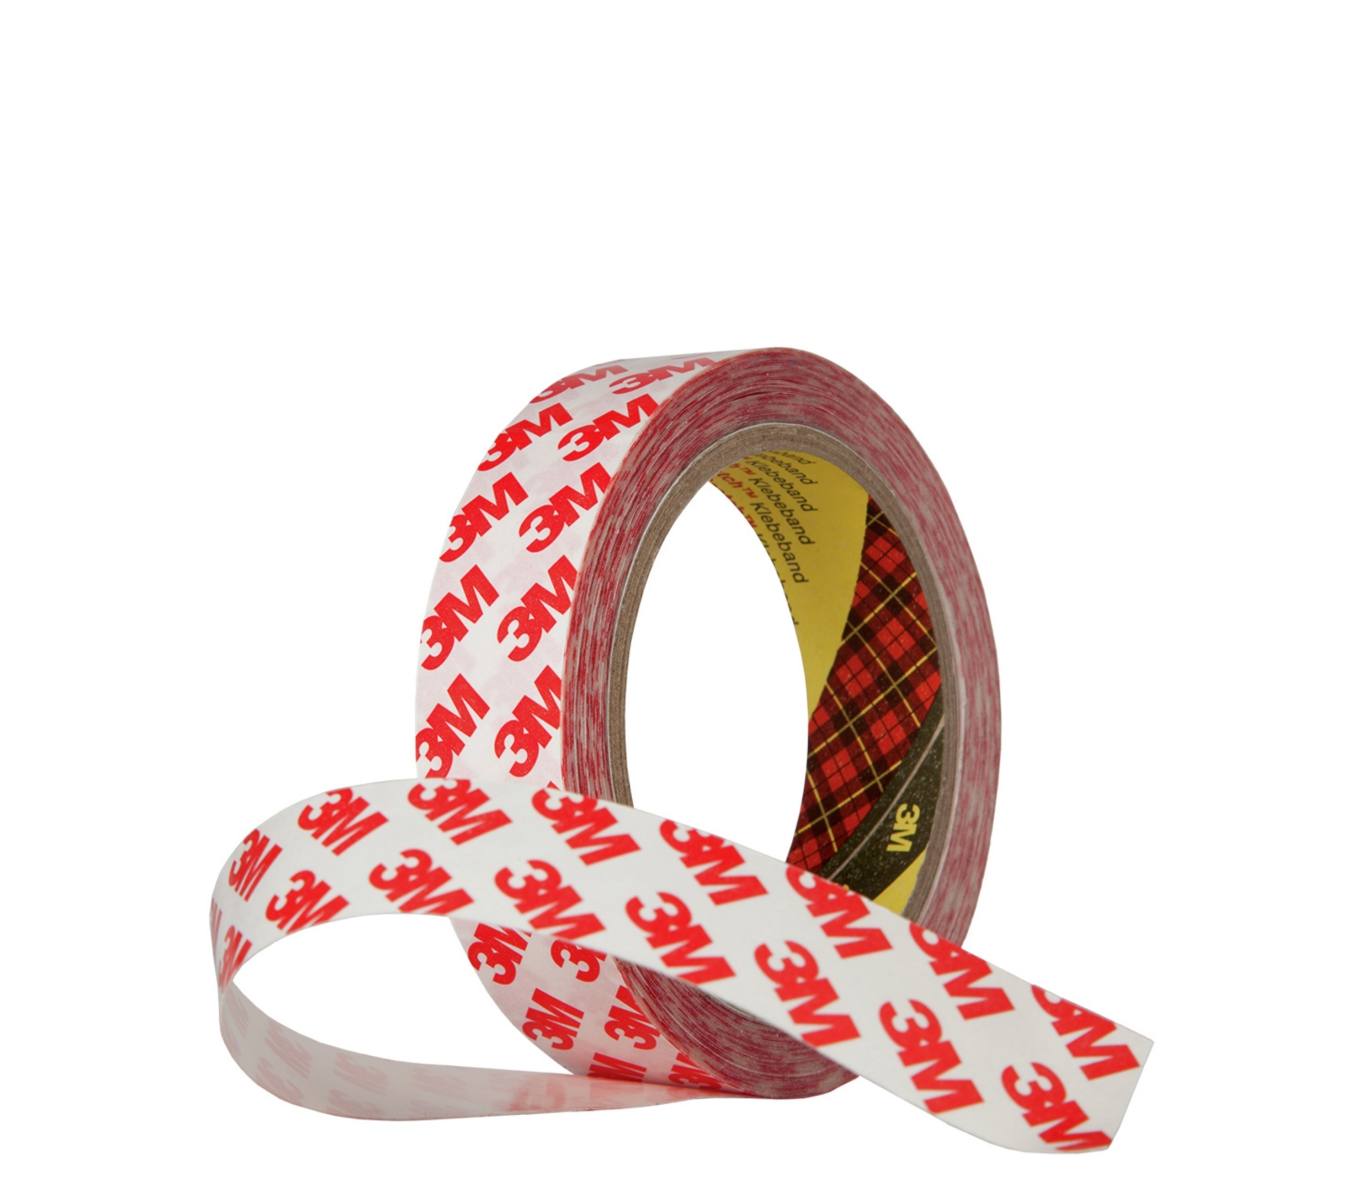 3M Double-sided adhesive tape with polyester backing 9088-200, transparent, 38 mm x 50 m, 0.2 mm